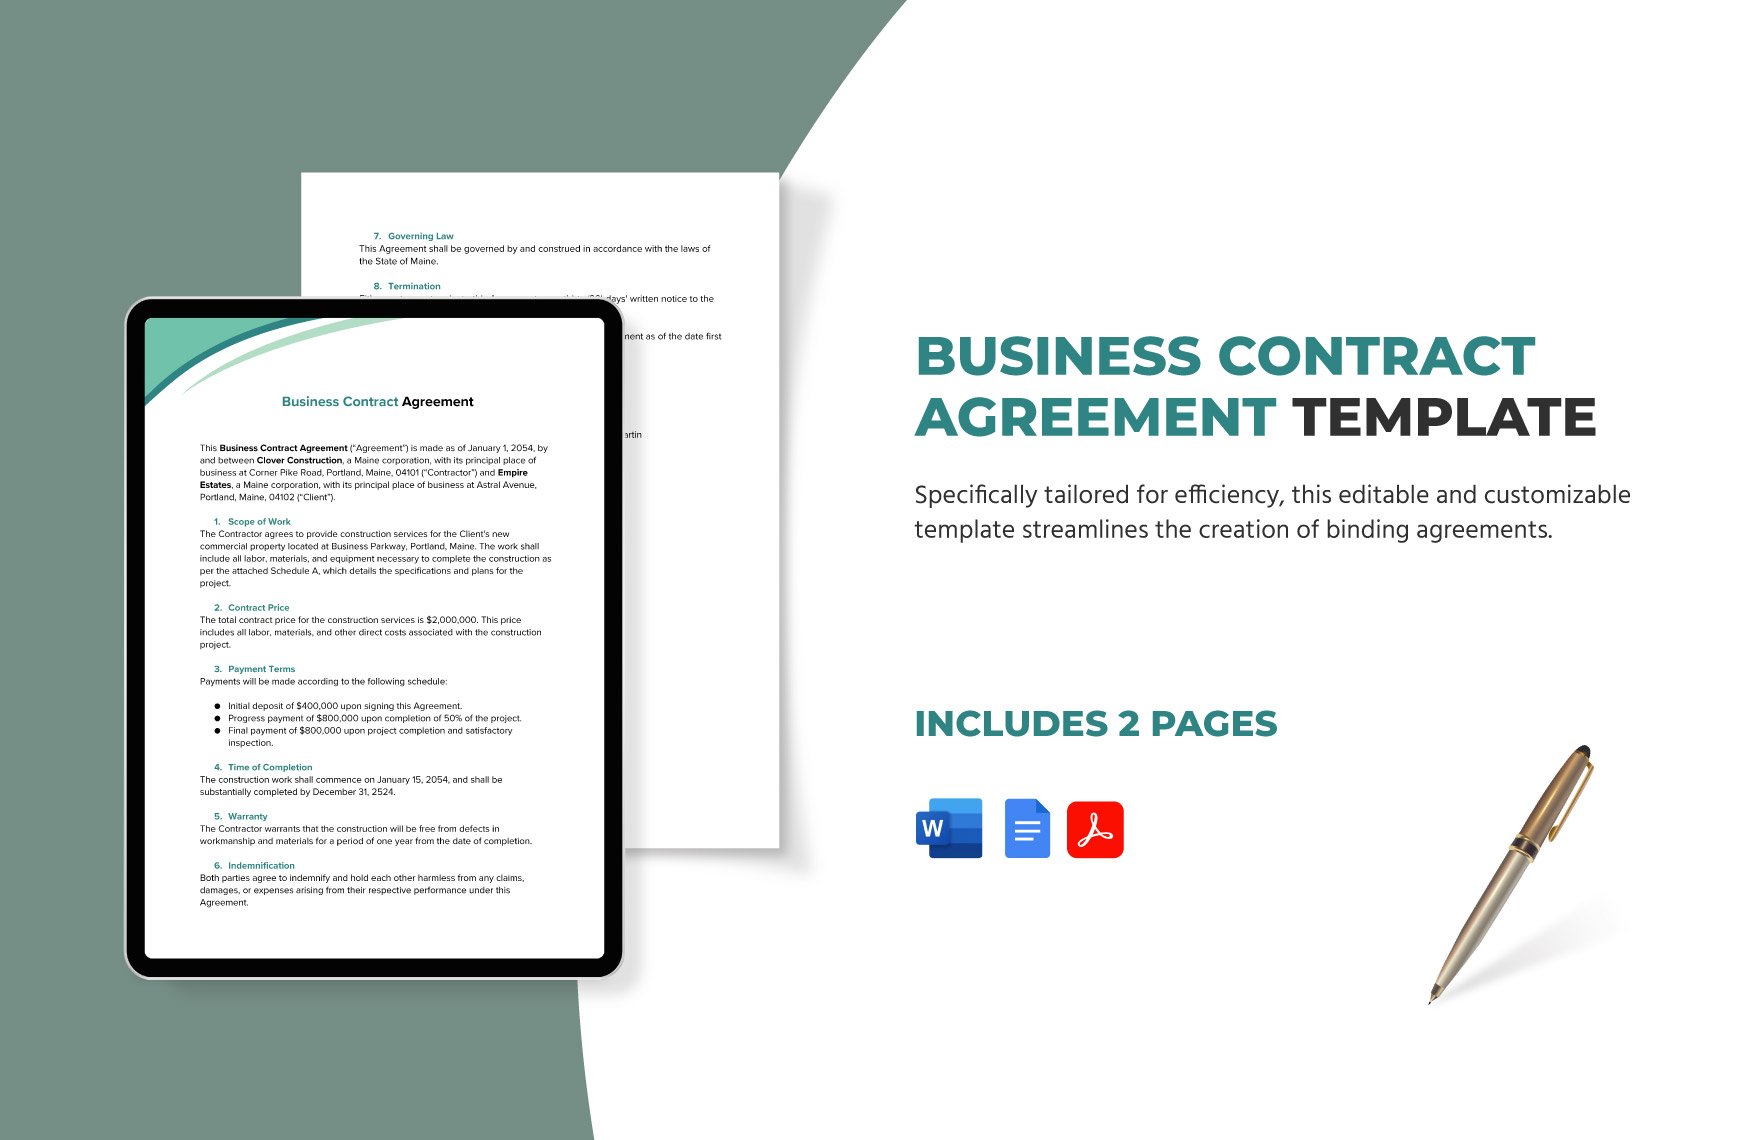 Business Contract Agreement Template